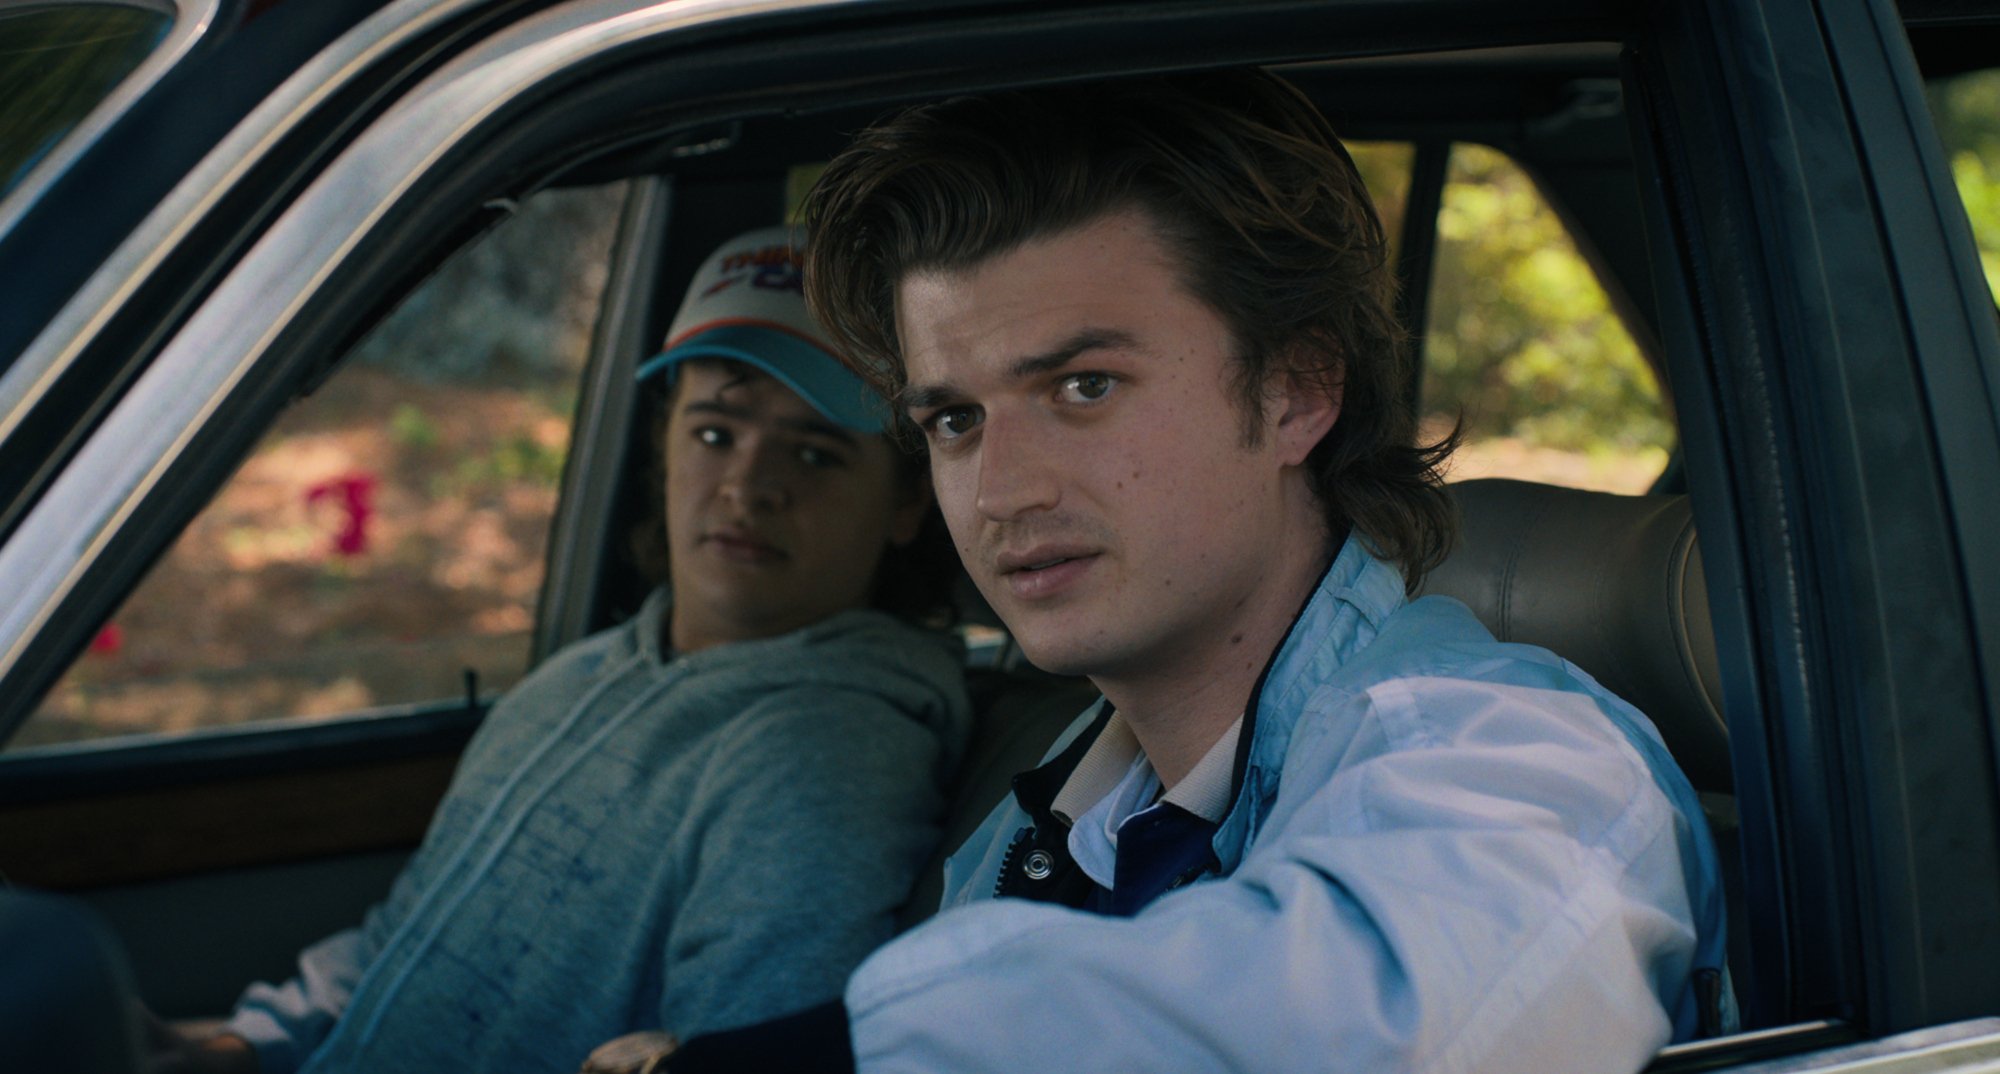 Stranger Things Co-Showrunner Shoots Down Steve-Centric Fan Theory Ahead Of  Season 4 Vol. 2, But It's Not Totally Comforting